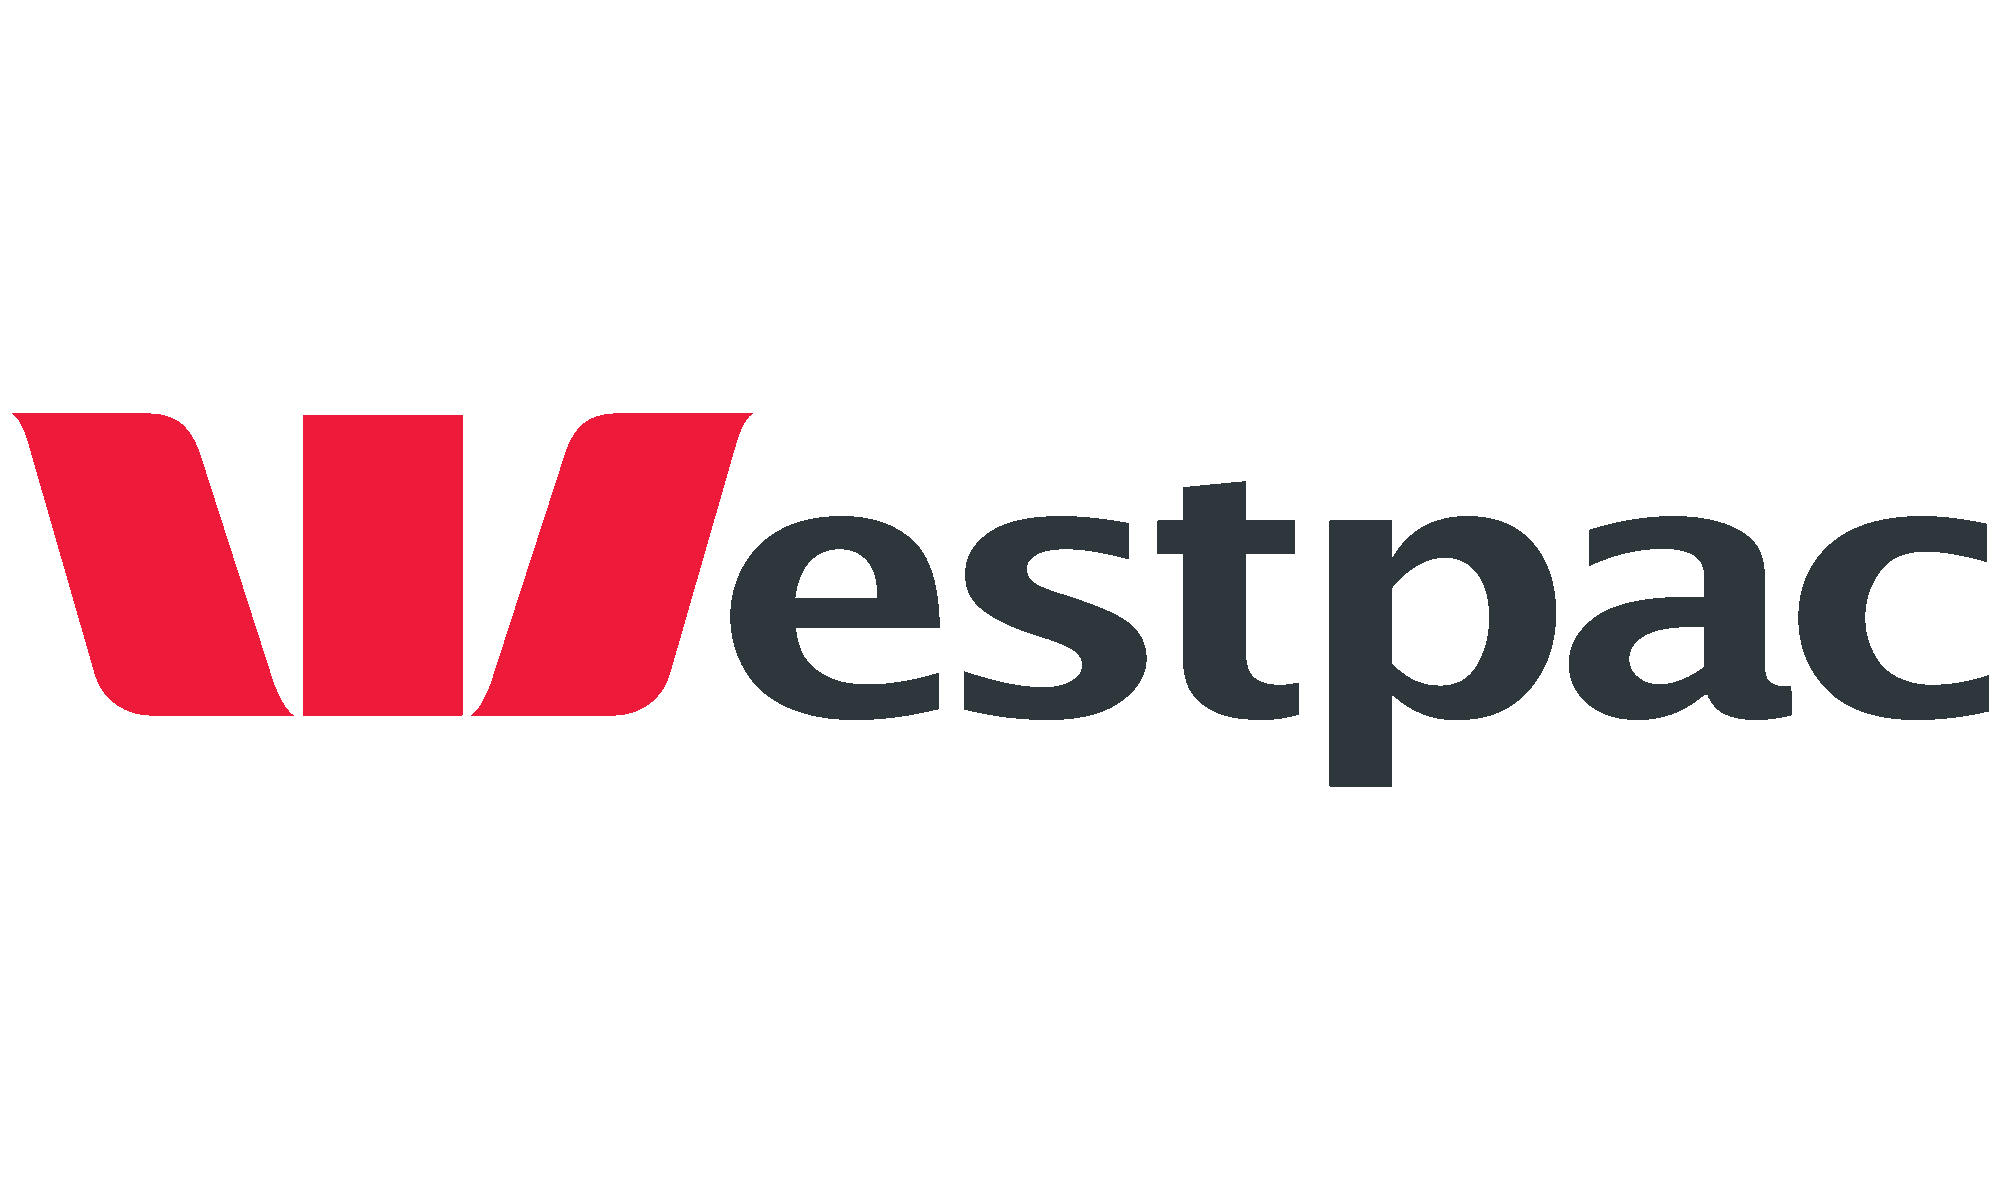 f6e672bc-3454-4307-be5f-8275416c1f29_Westpac_go1.png